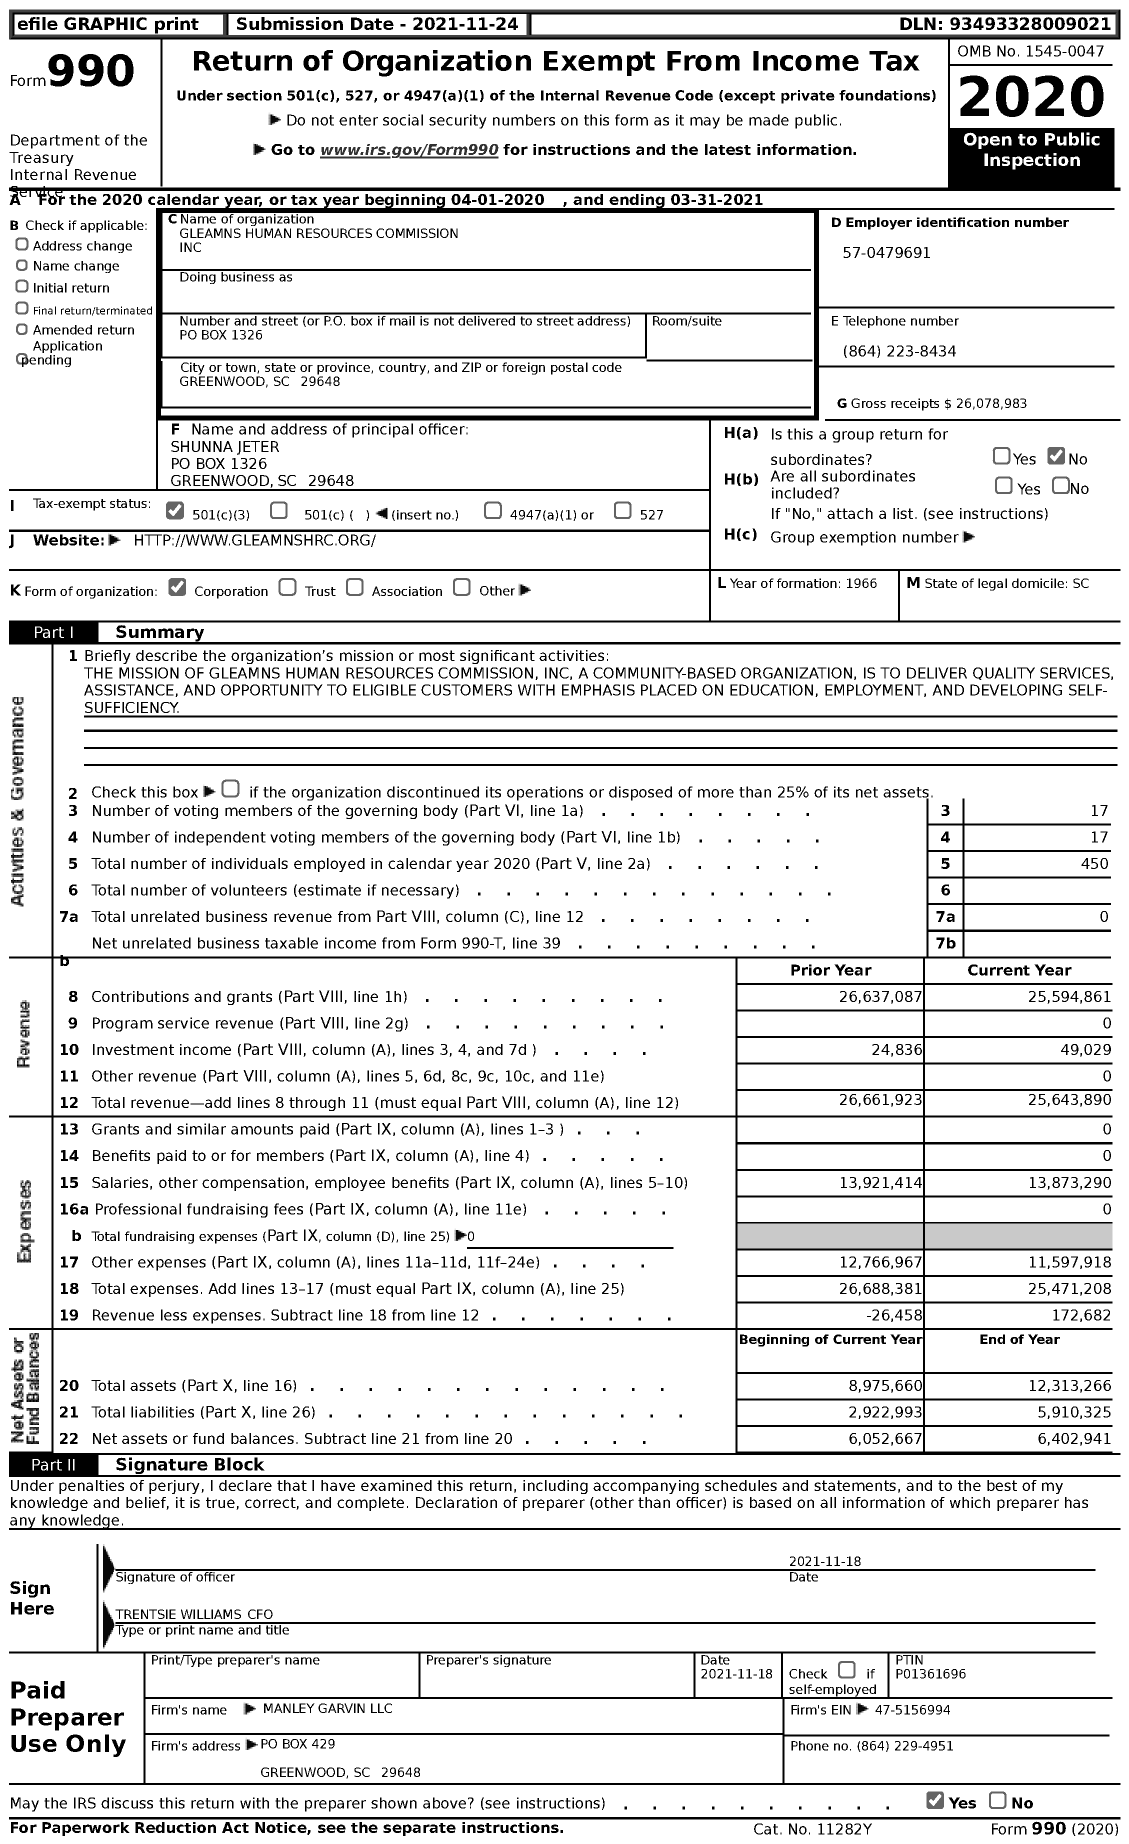 Image of first page of 2020 Form 990 for Gleamns Human Resources Commission